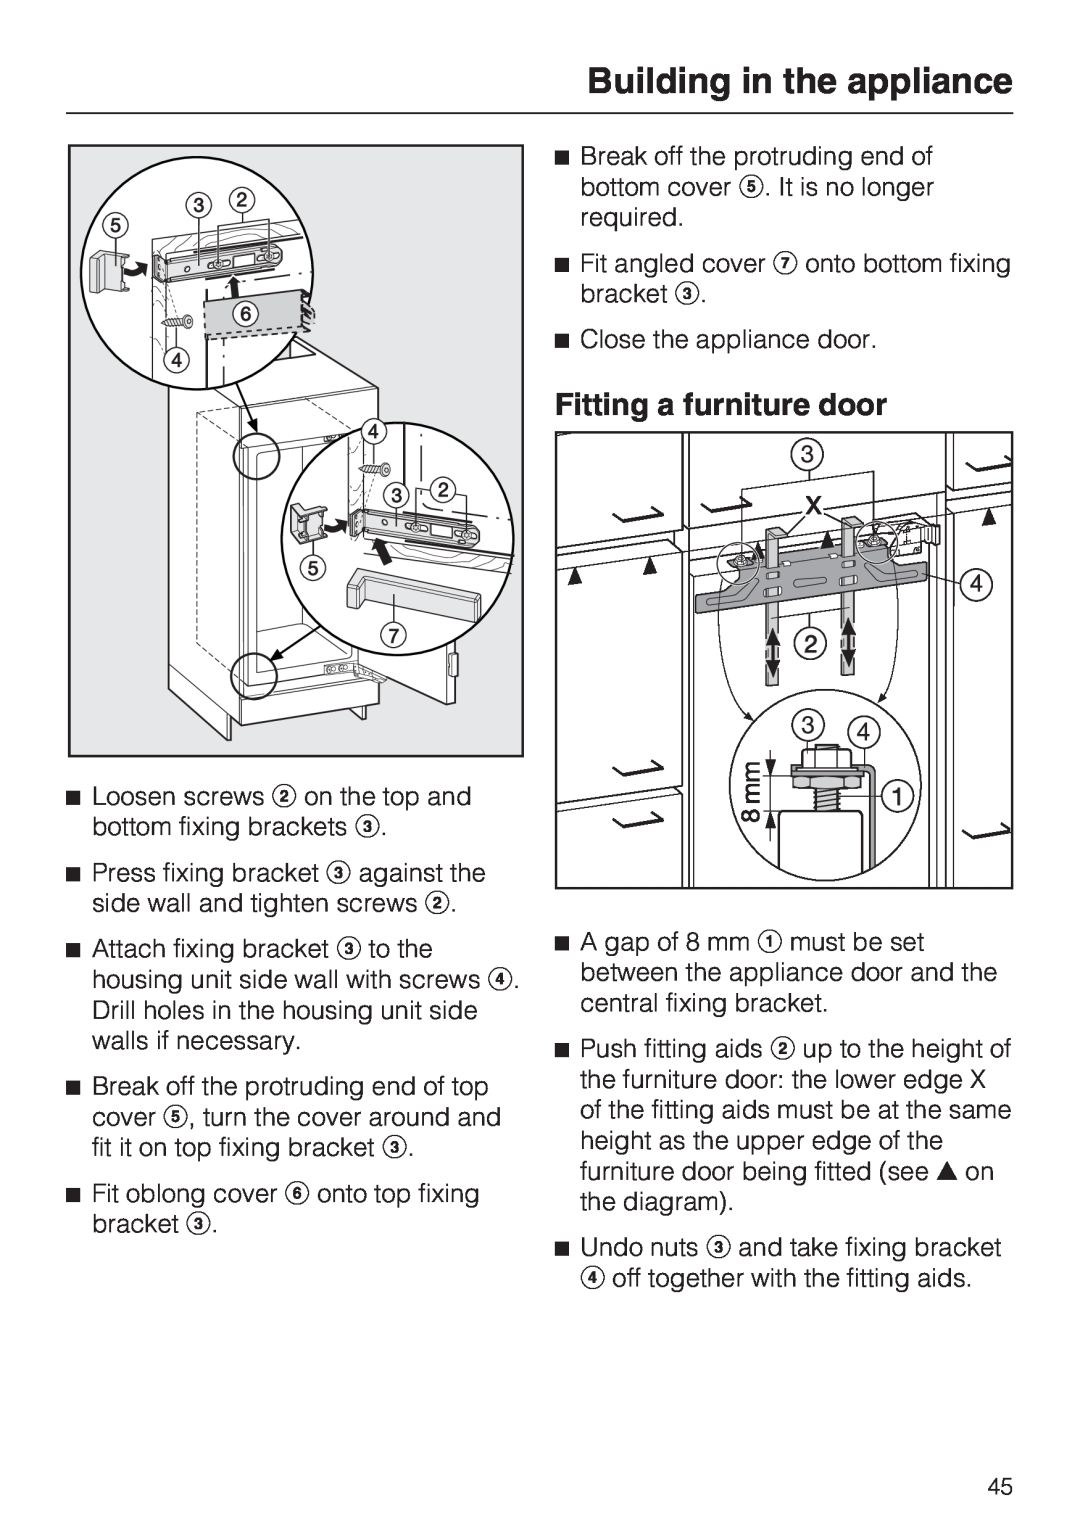 Miele K9552, K9752 installation instructions Fitting a furniture door, Building in the appliance 